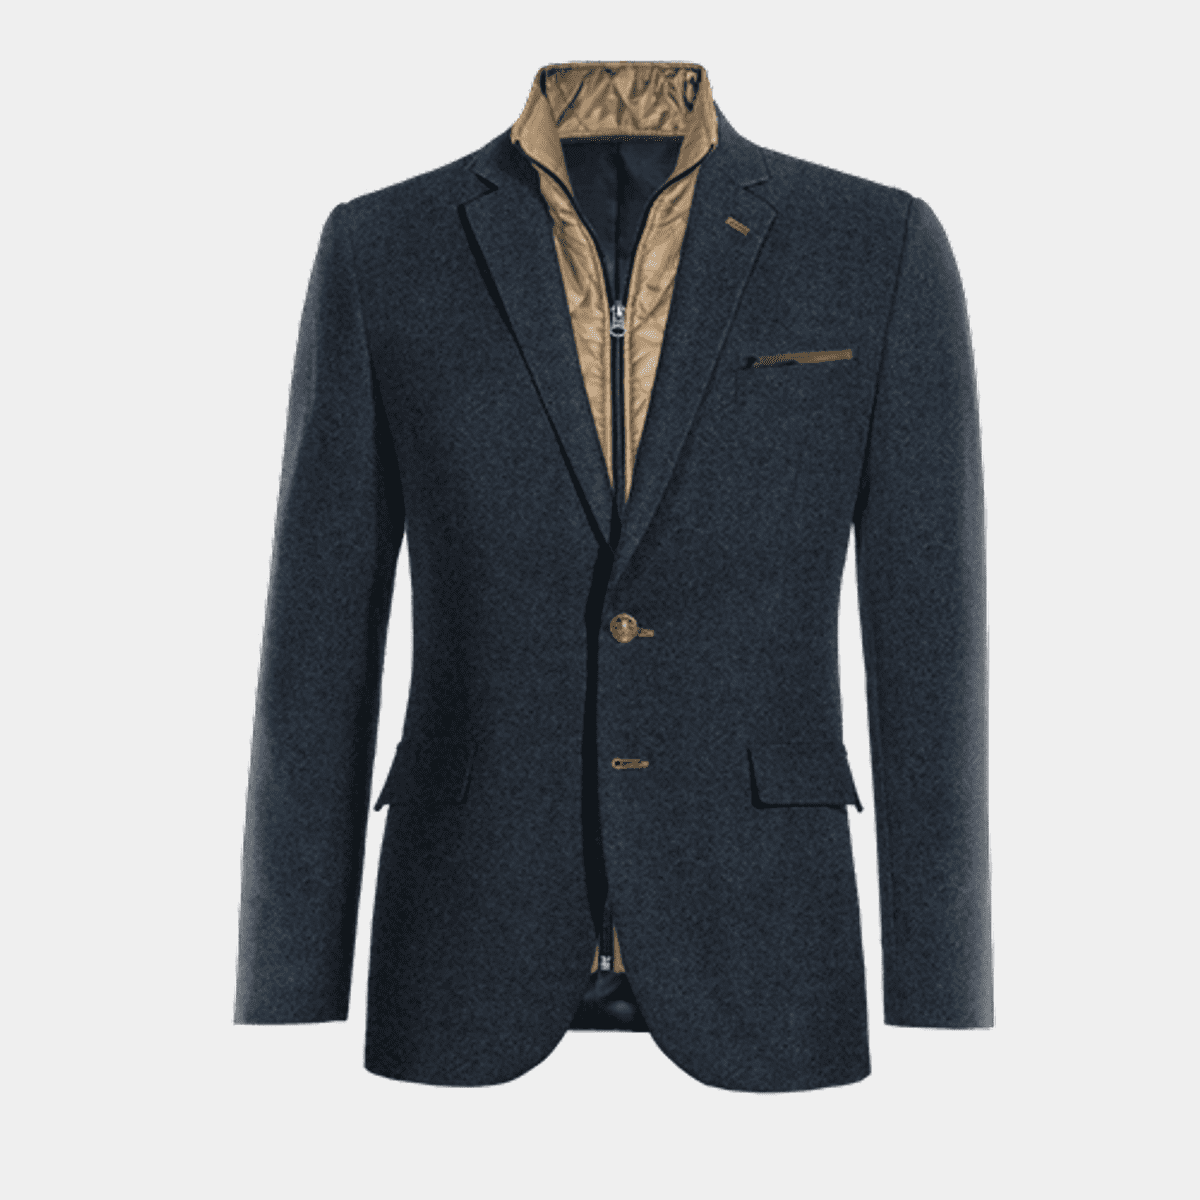 Navy blue Donegal tweed Jacket with elbow patches with